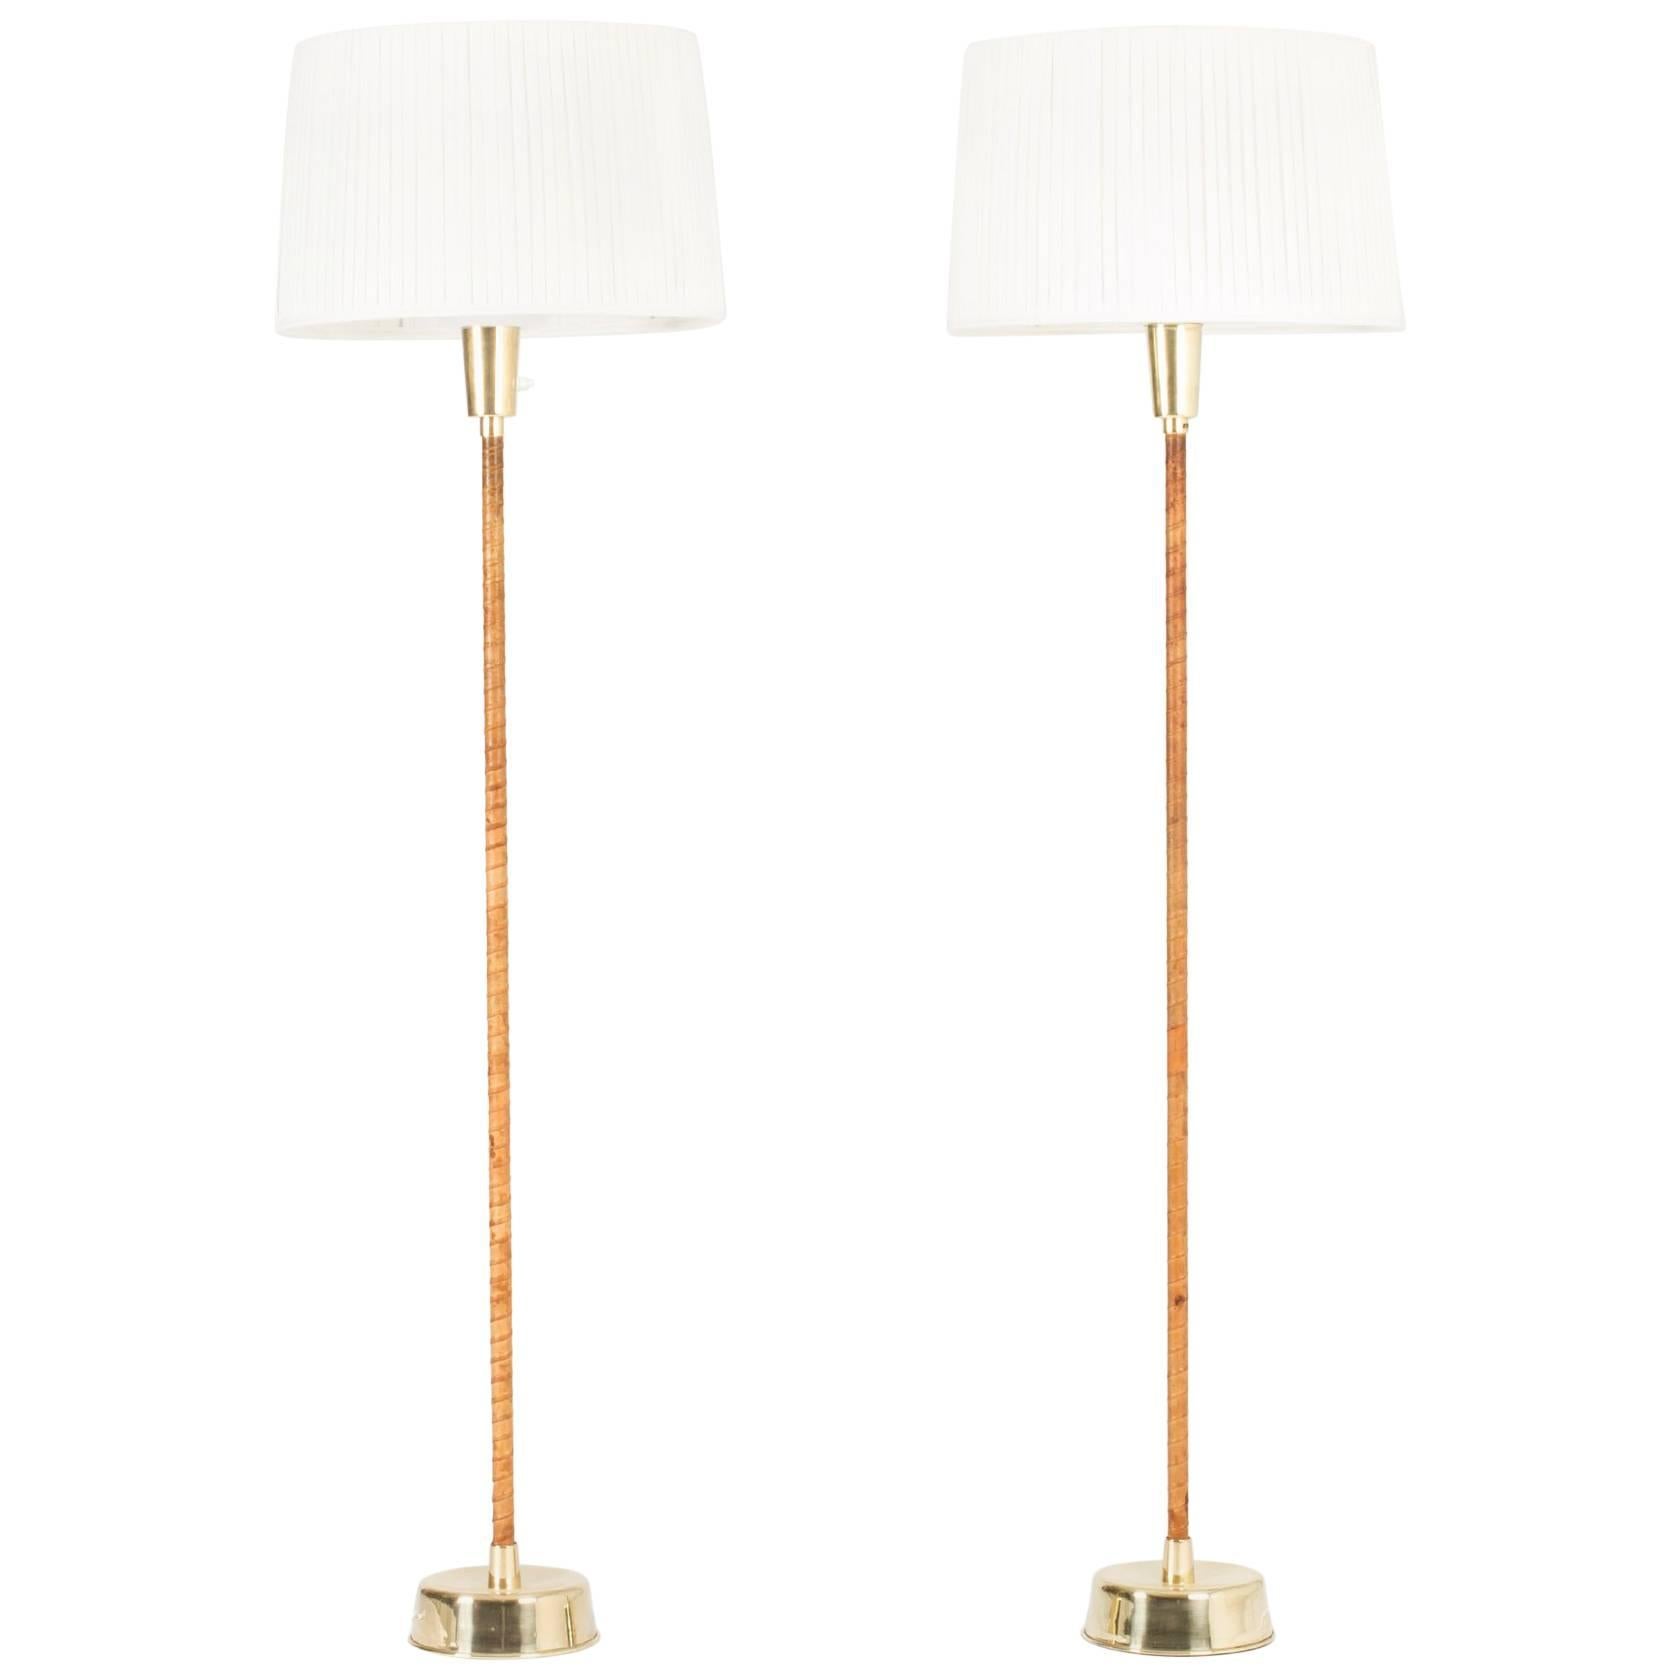 Pair of Brass and Leather Floor Lamps by Lisa Johansson-Pape